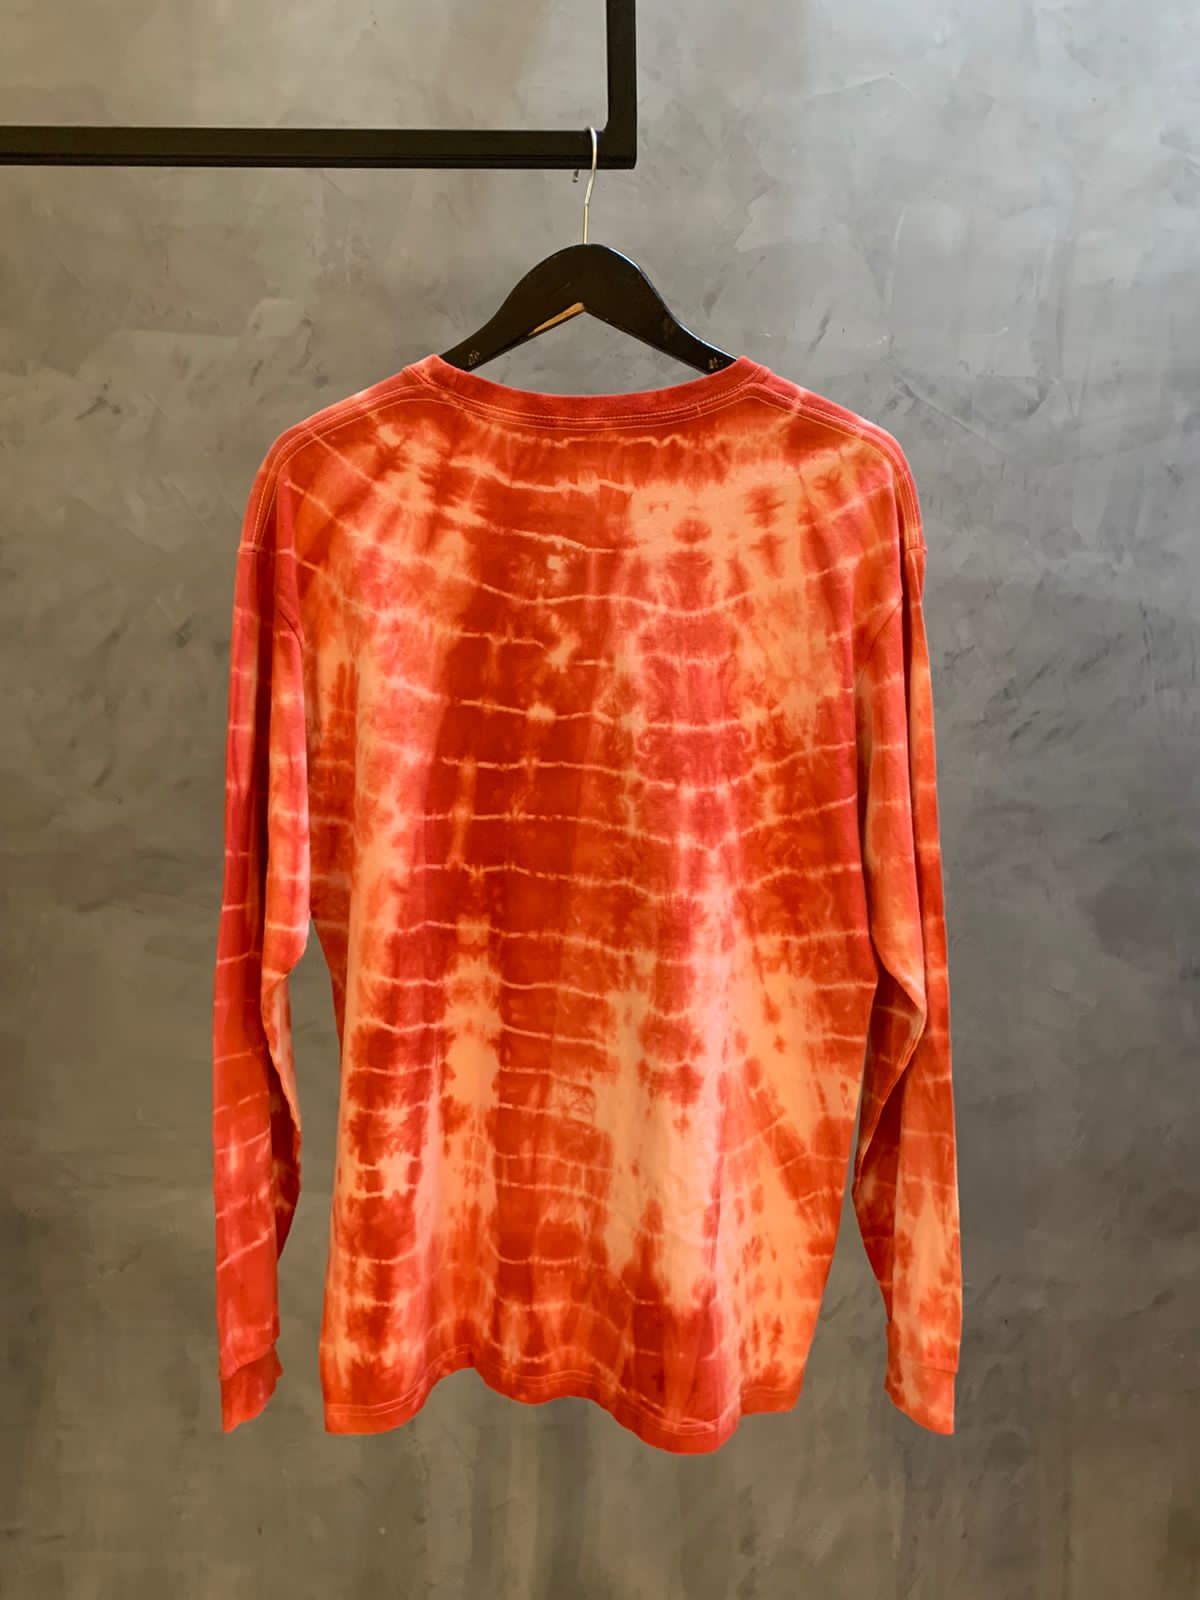 long sleeve dye tee with reflector vinly